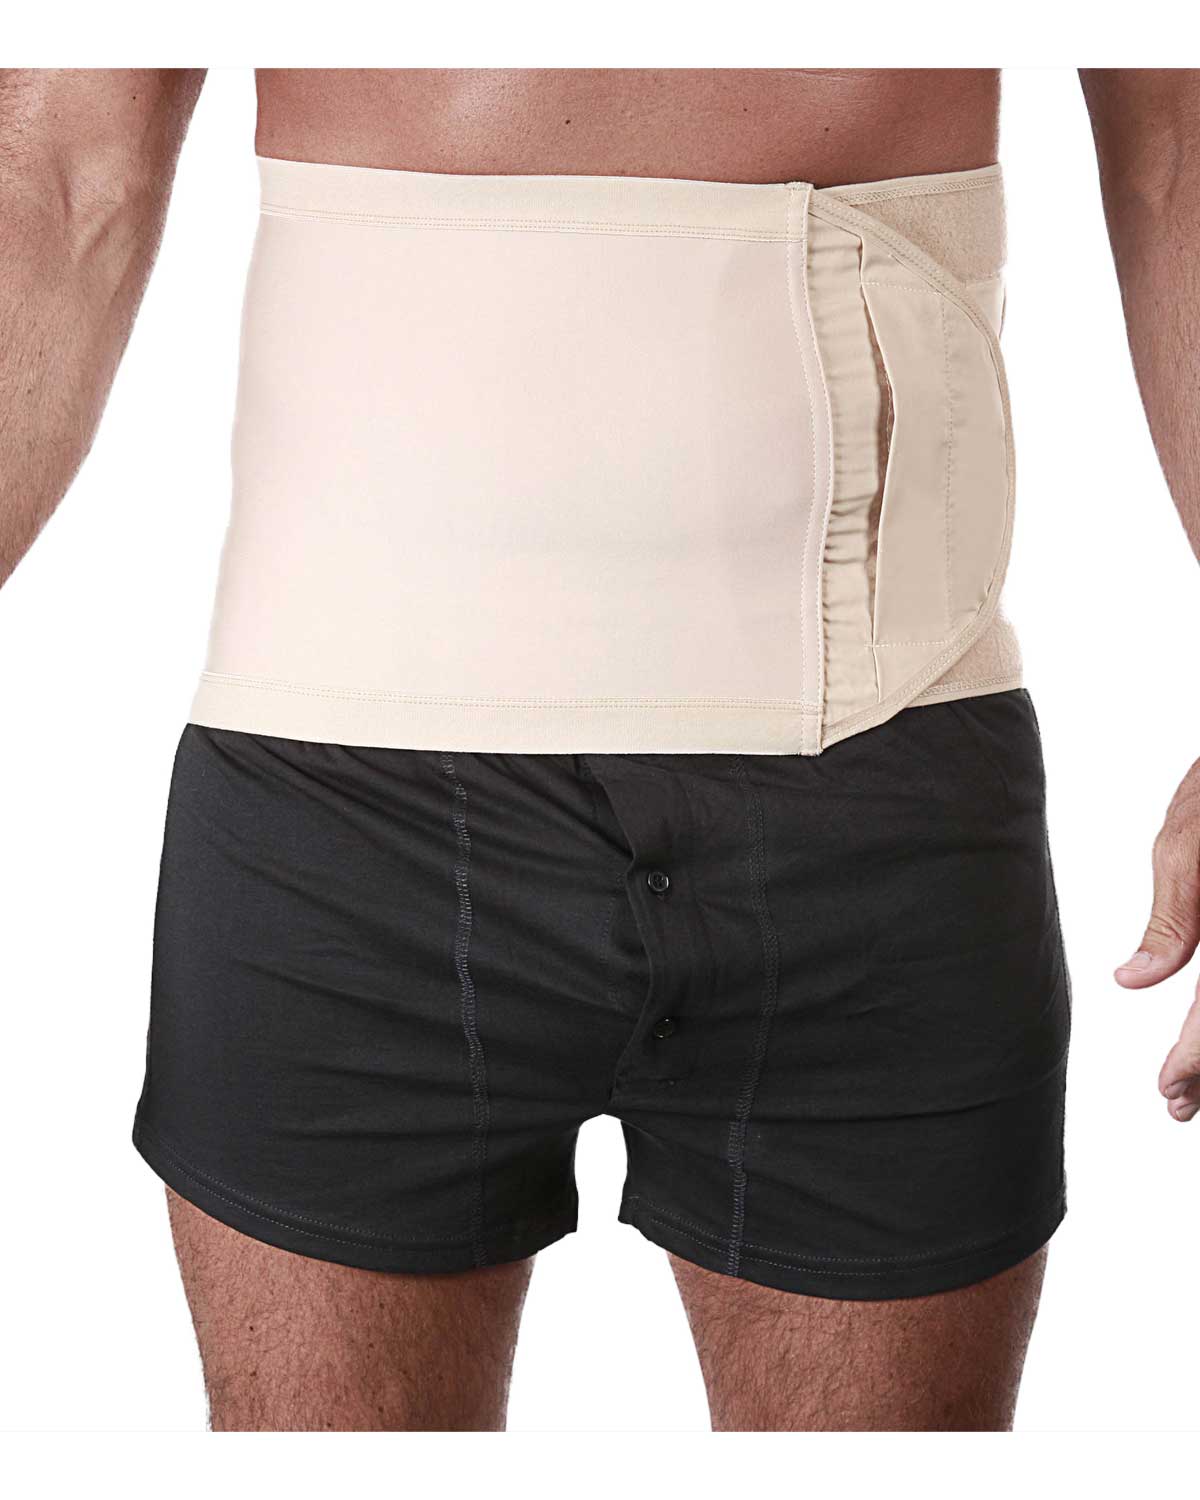 CUI Unisex Anti Roll Wraparound Ostomy Hernia Support Belt - 26cm/10inch - 1 each, 26 CM / 10 INCH, SMALL - WHITE - NO OPENING-1